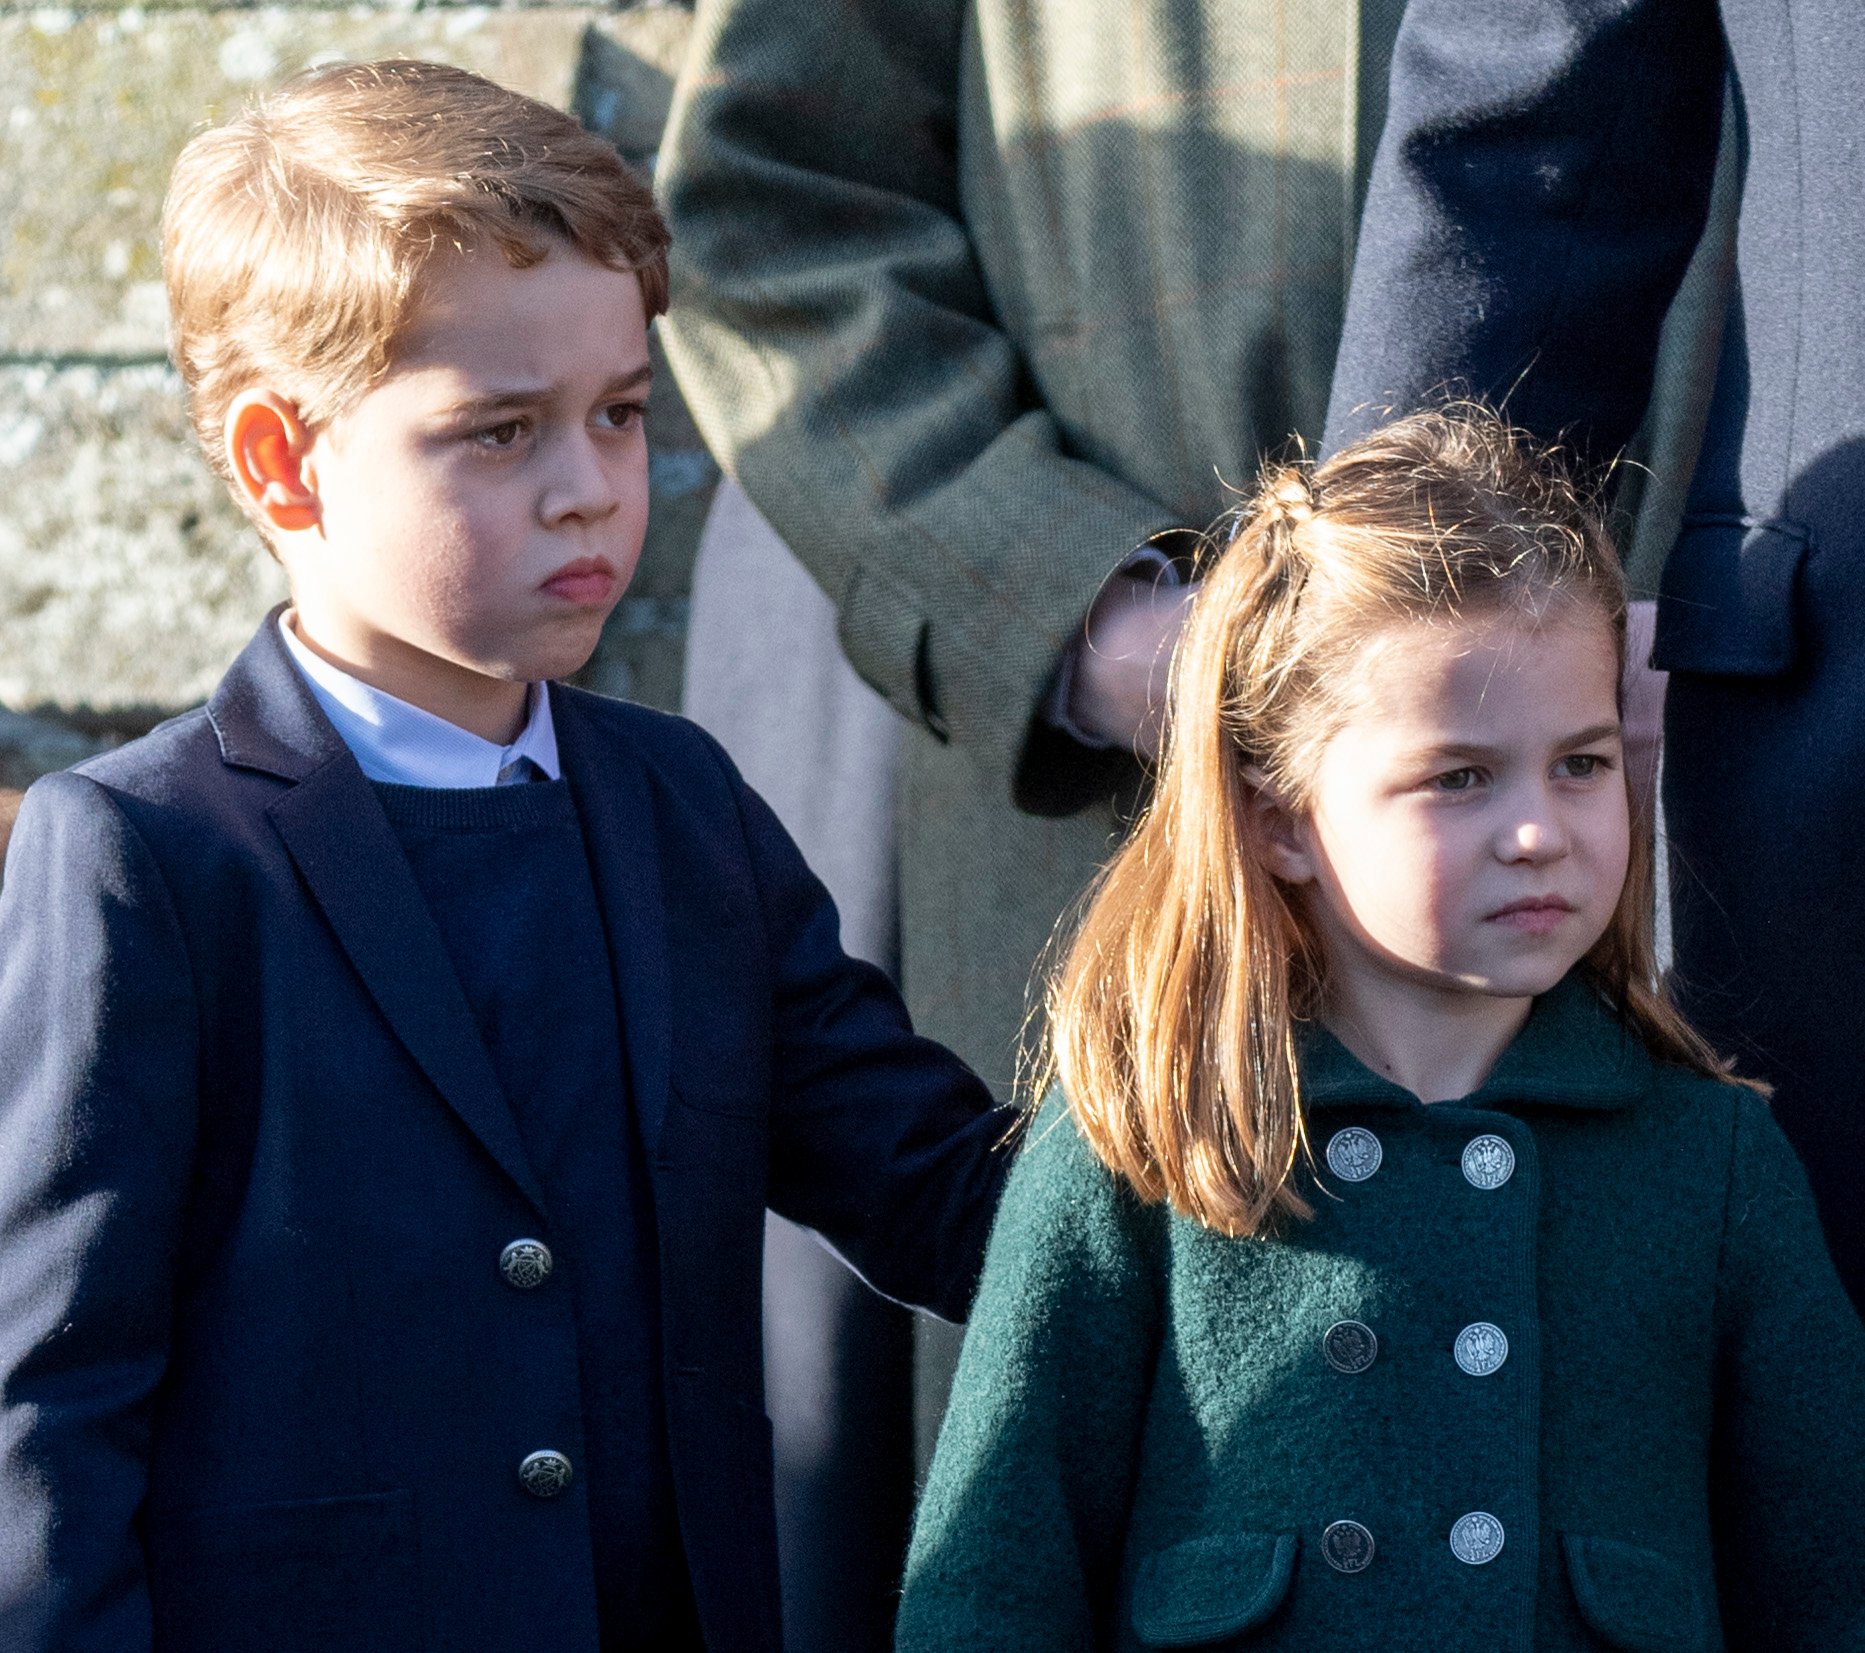 Prince George and Princess Charlotte attend Christmas Day church service on December 25, 2019